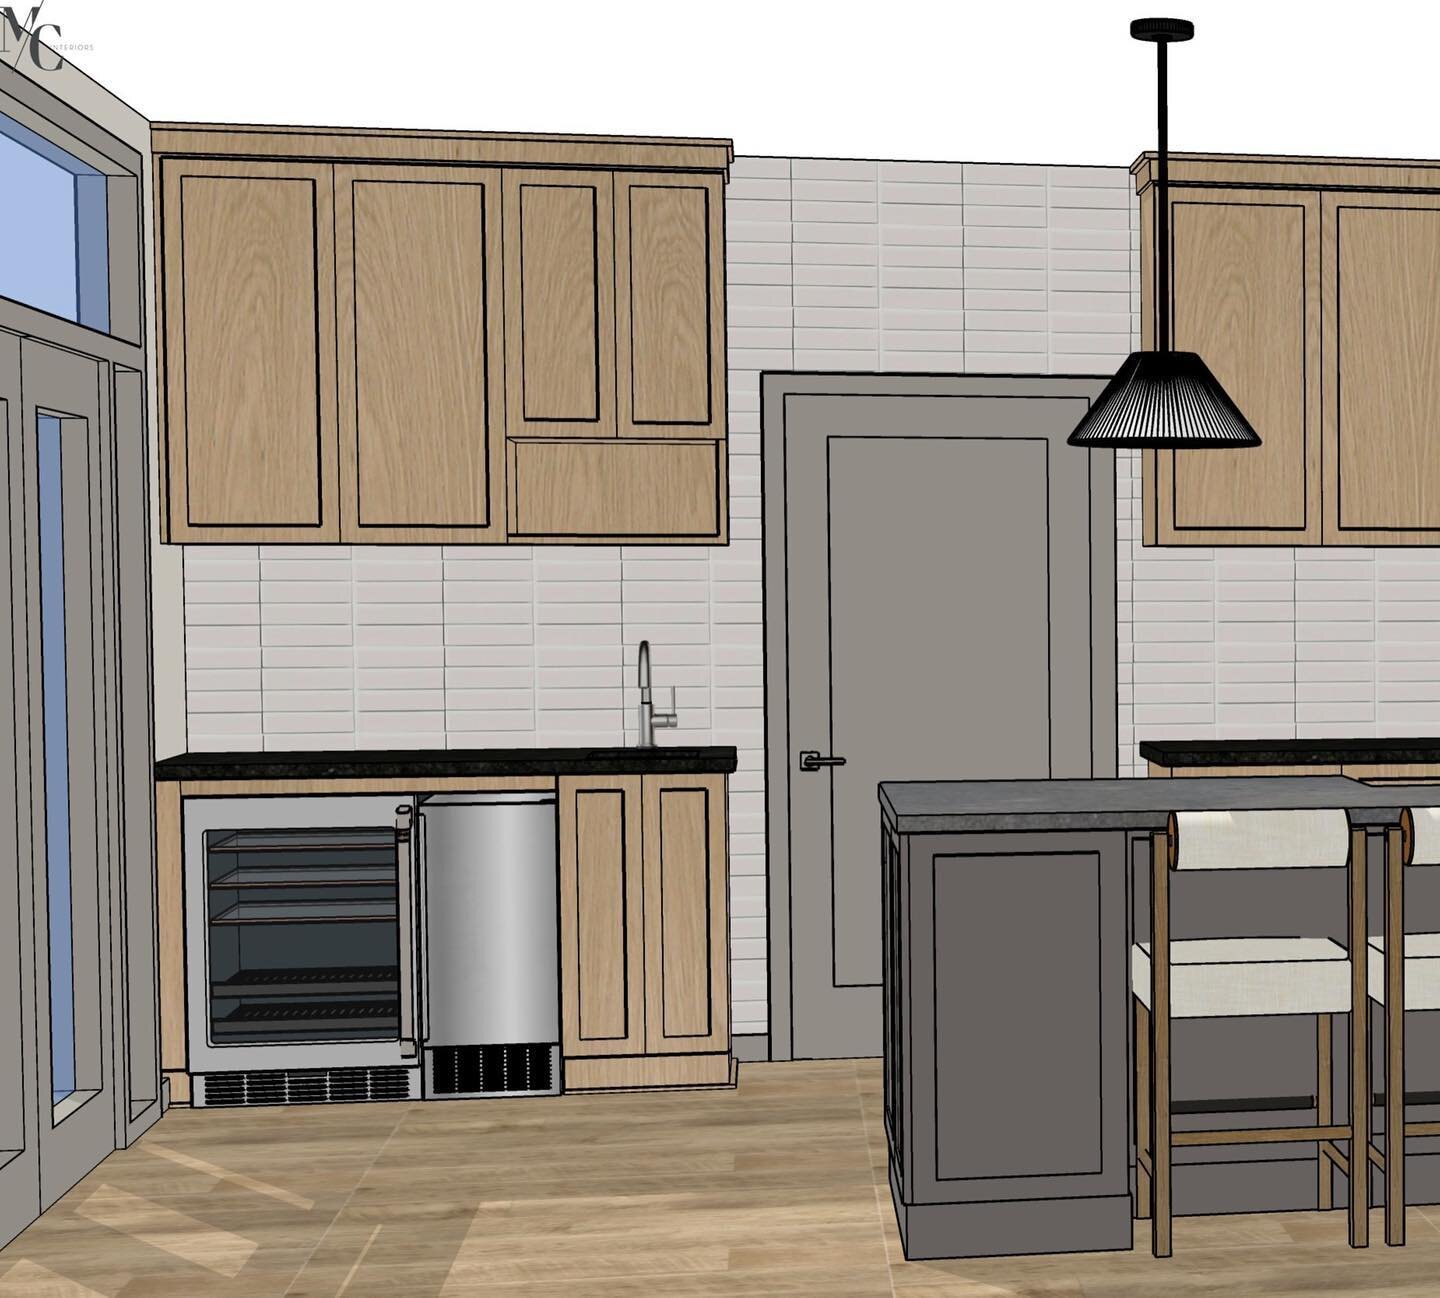 This project concept has been quite easily one of my top ten favorites. From the wet bar area to larger than life island and corner pantry &ldquo;room&rdquo;, she&rsquo;s gonna be a stunner! Not to mention, this space will completely transform my cli